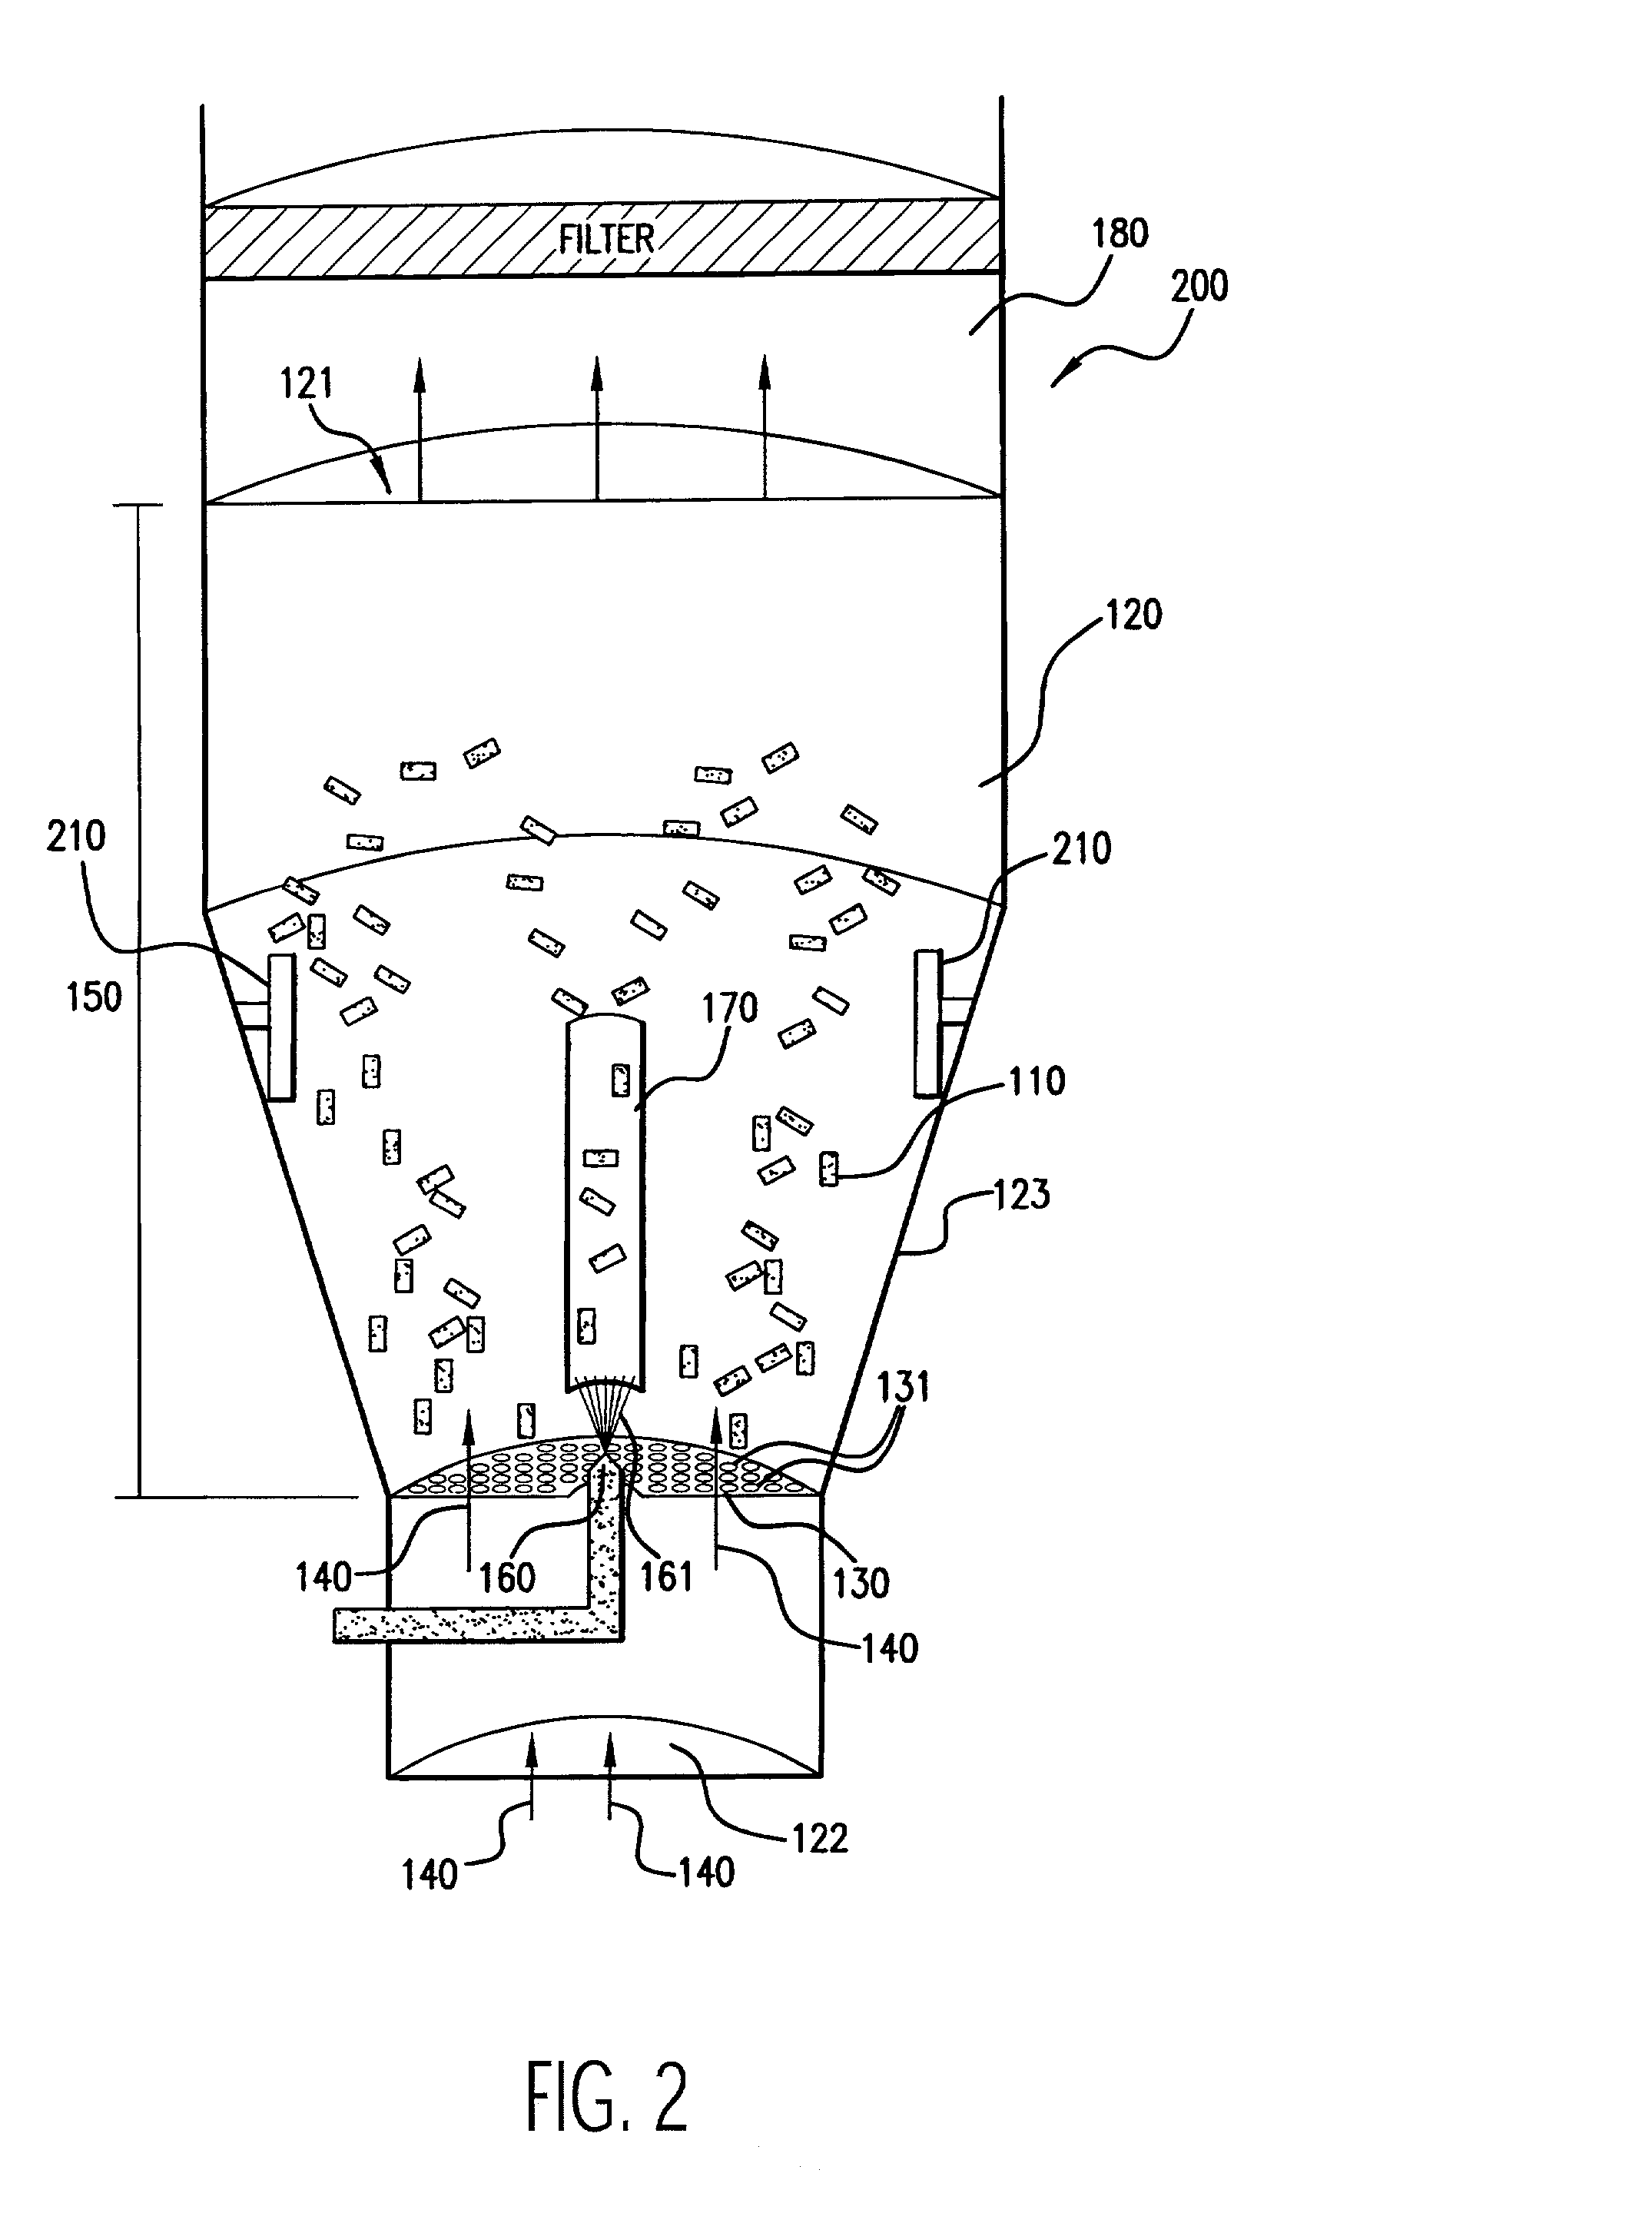 Mechanical and acoustical suspension coating of medical implants